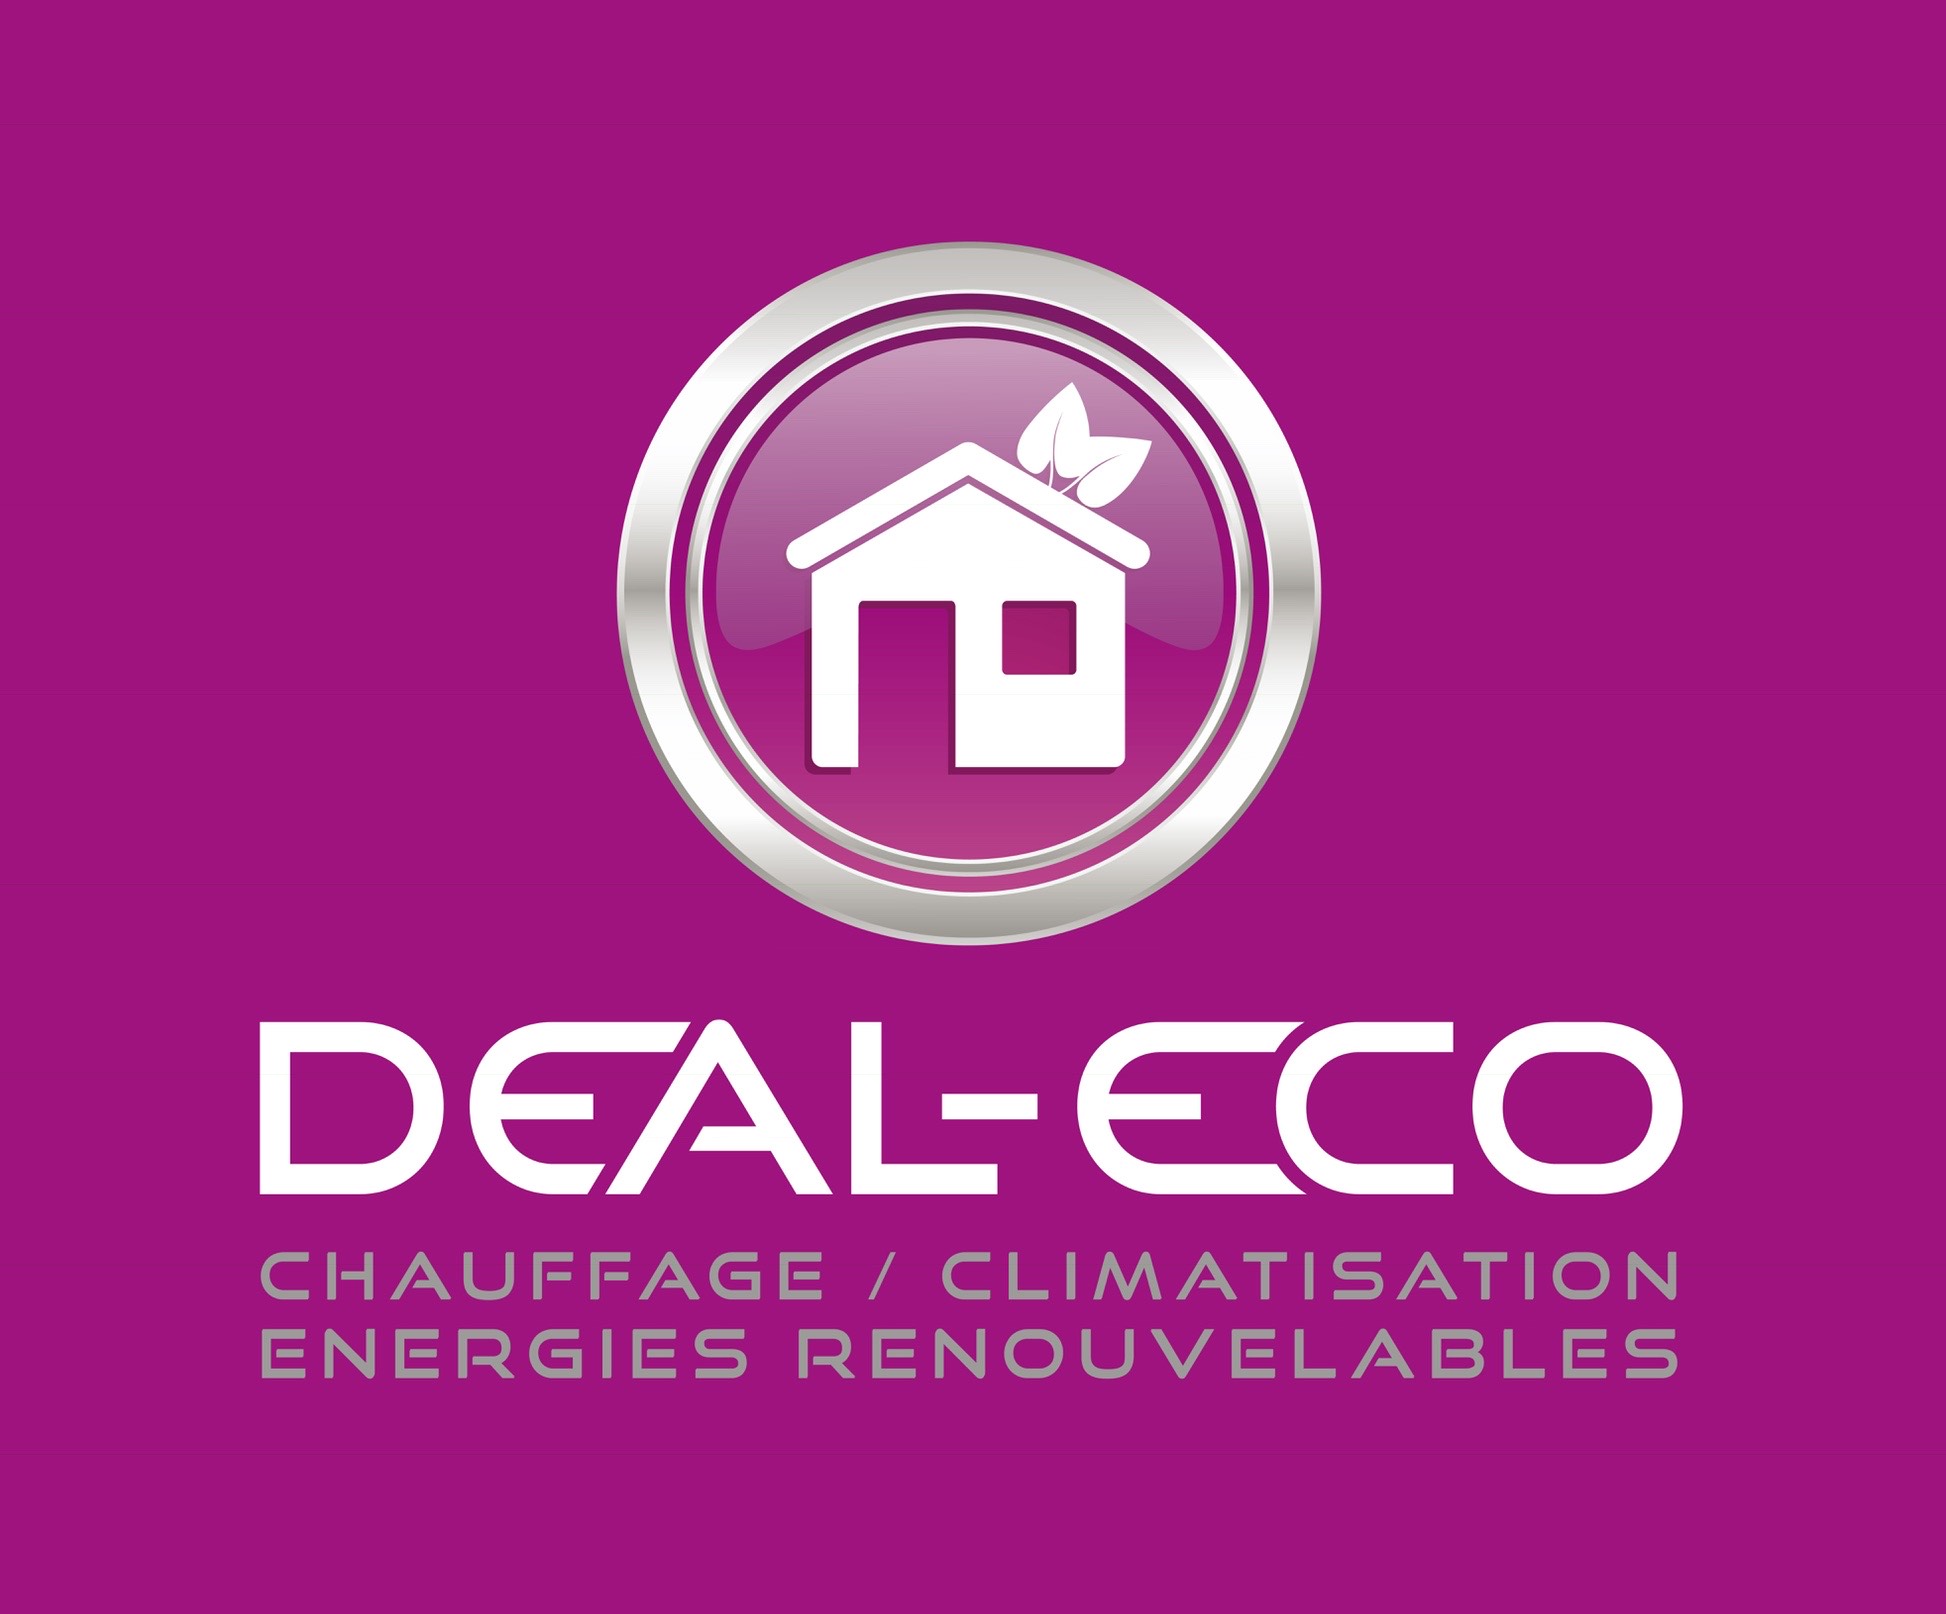 DEAL ECO